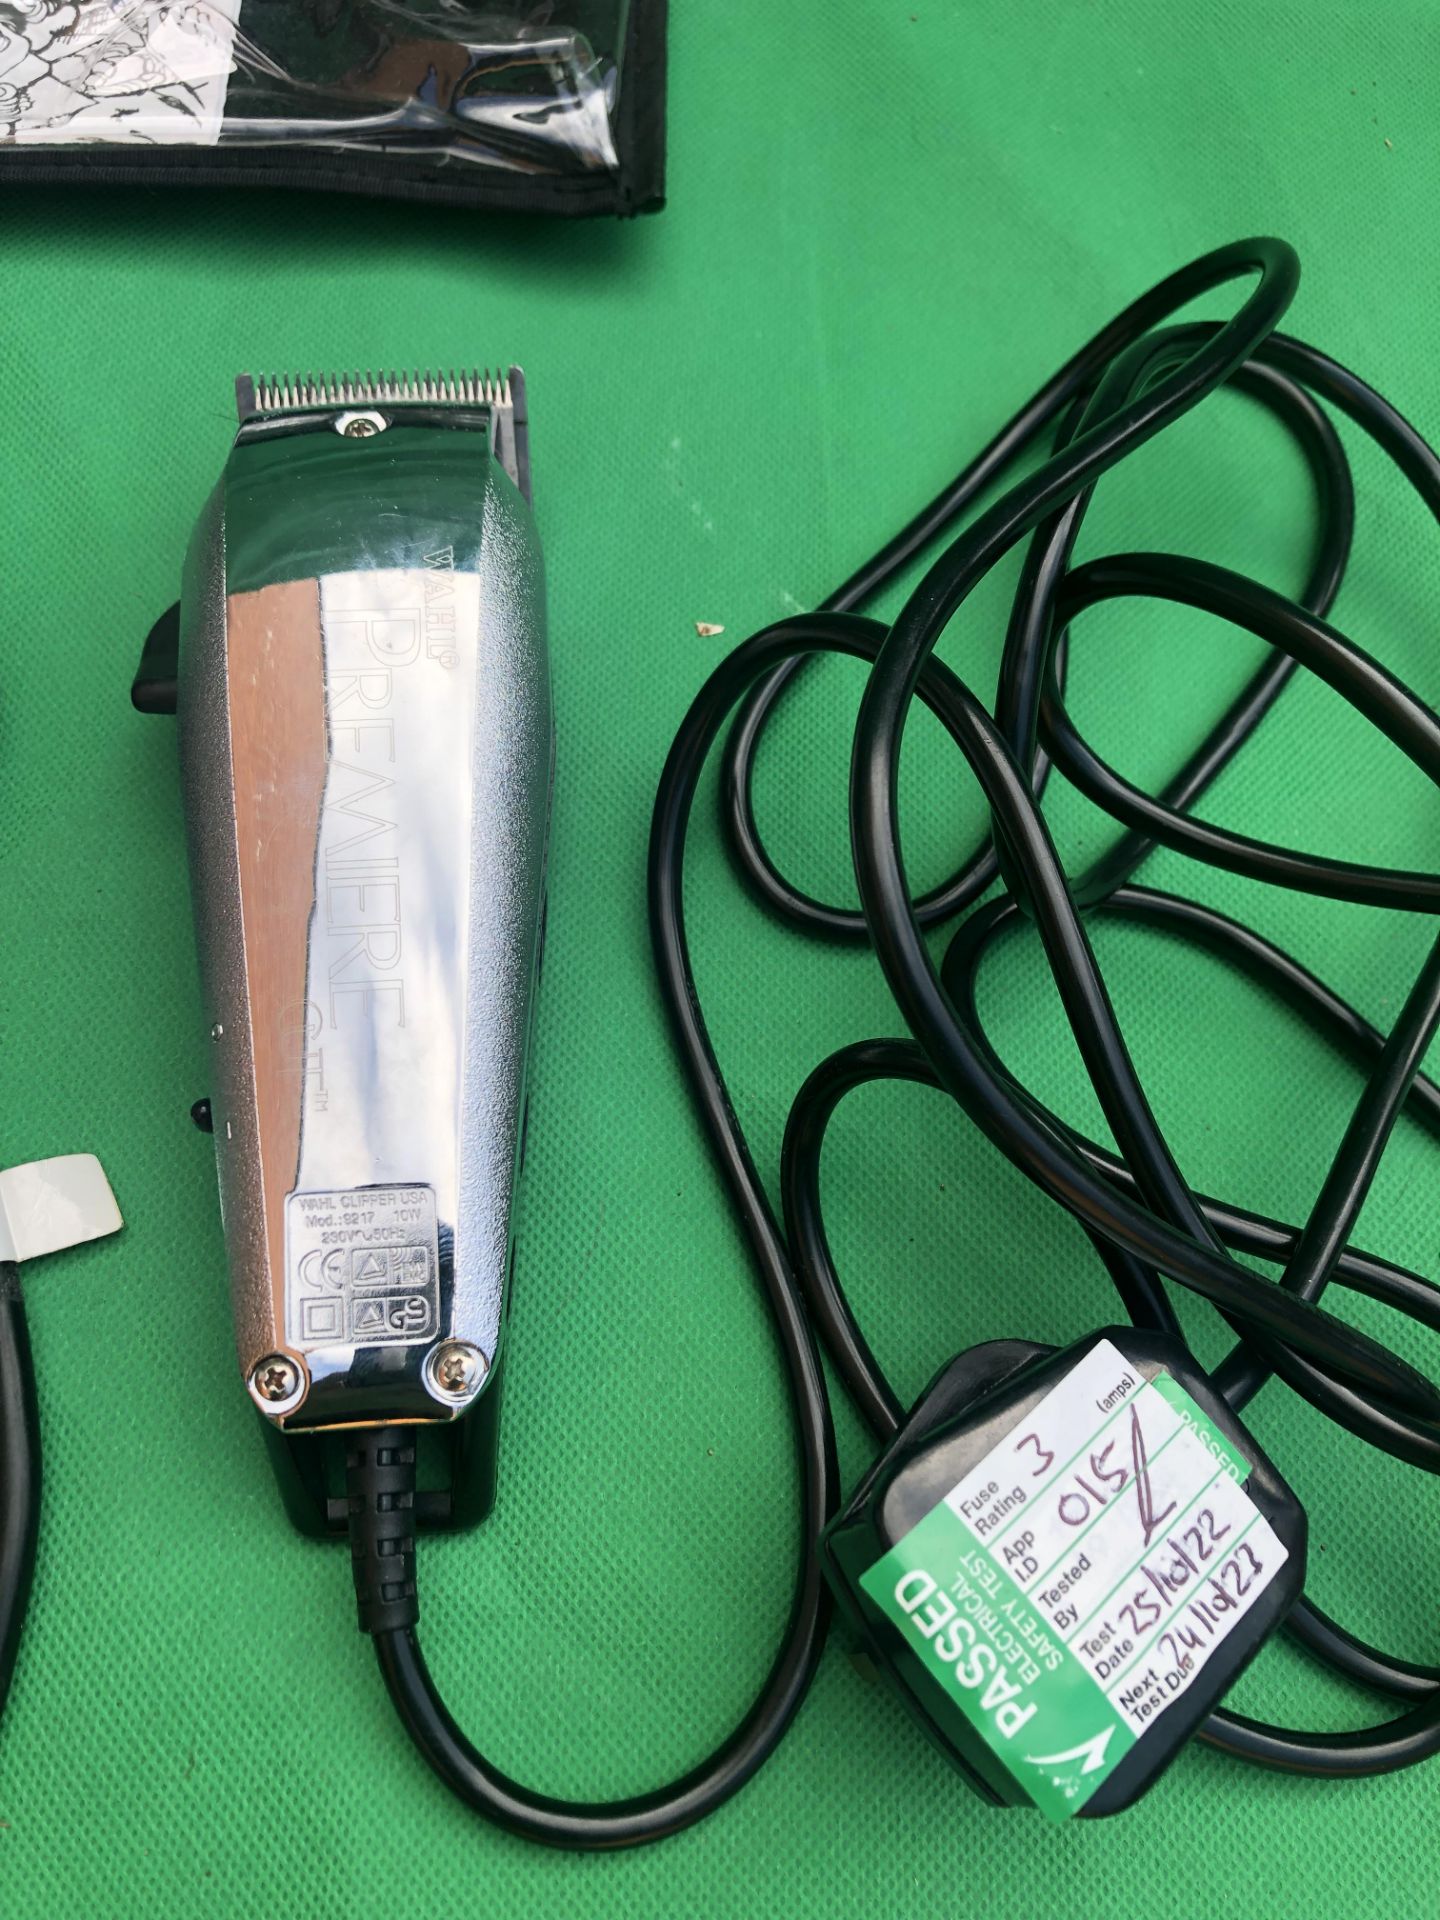 Whal hair trimmers x 3 with assorted attachments. 1 has broken cable. - Image 6 of 6